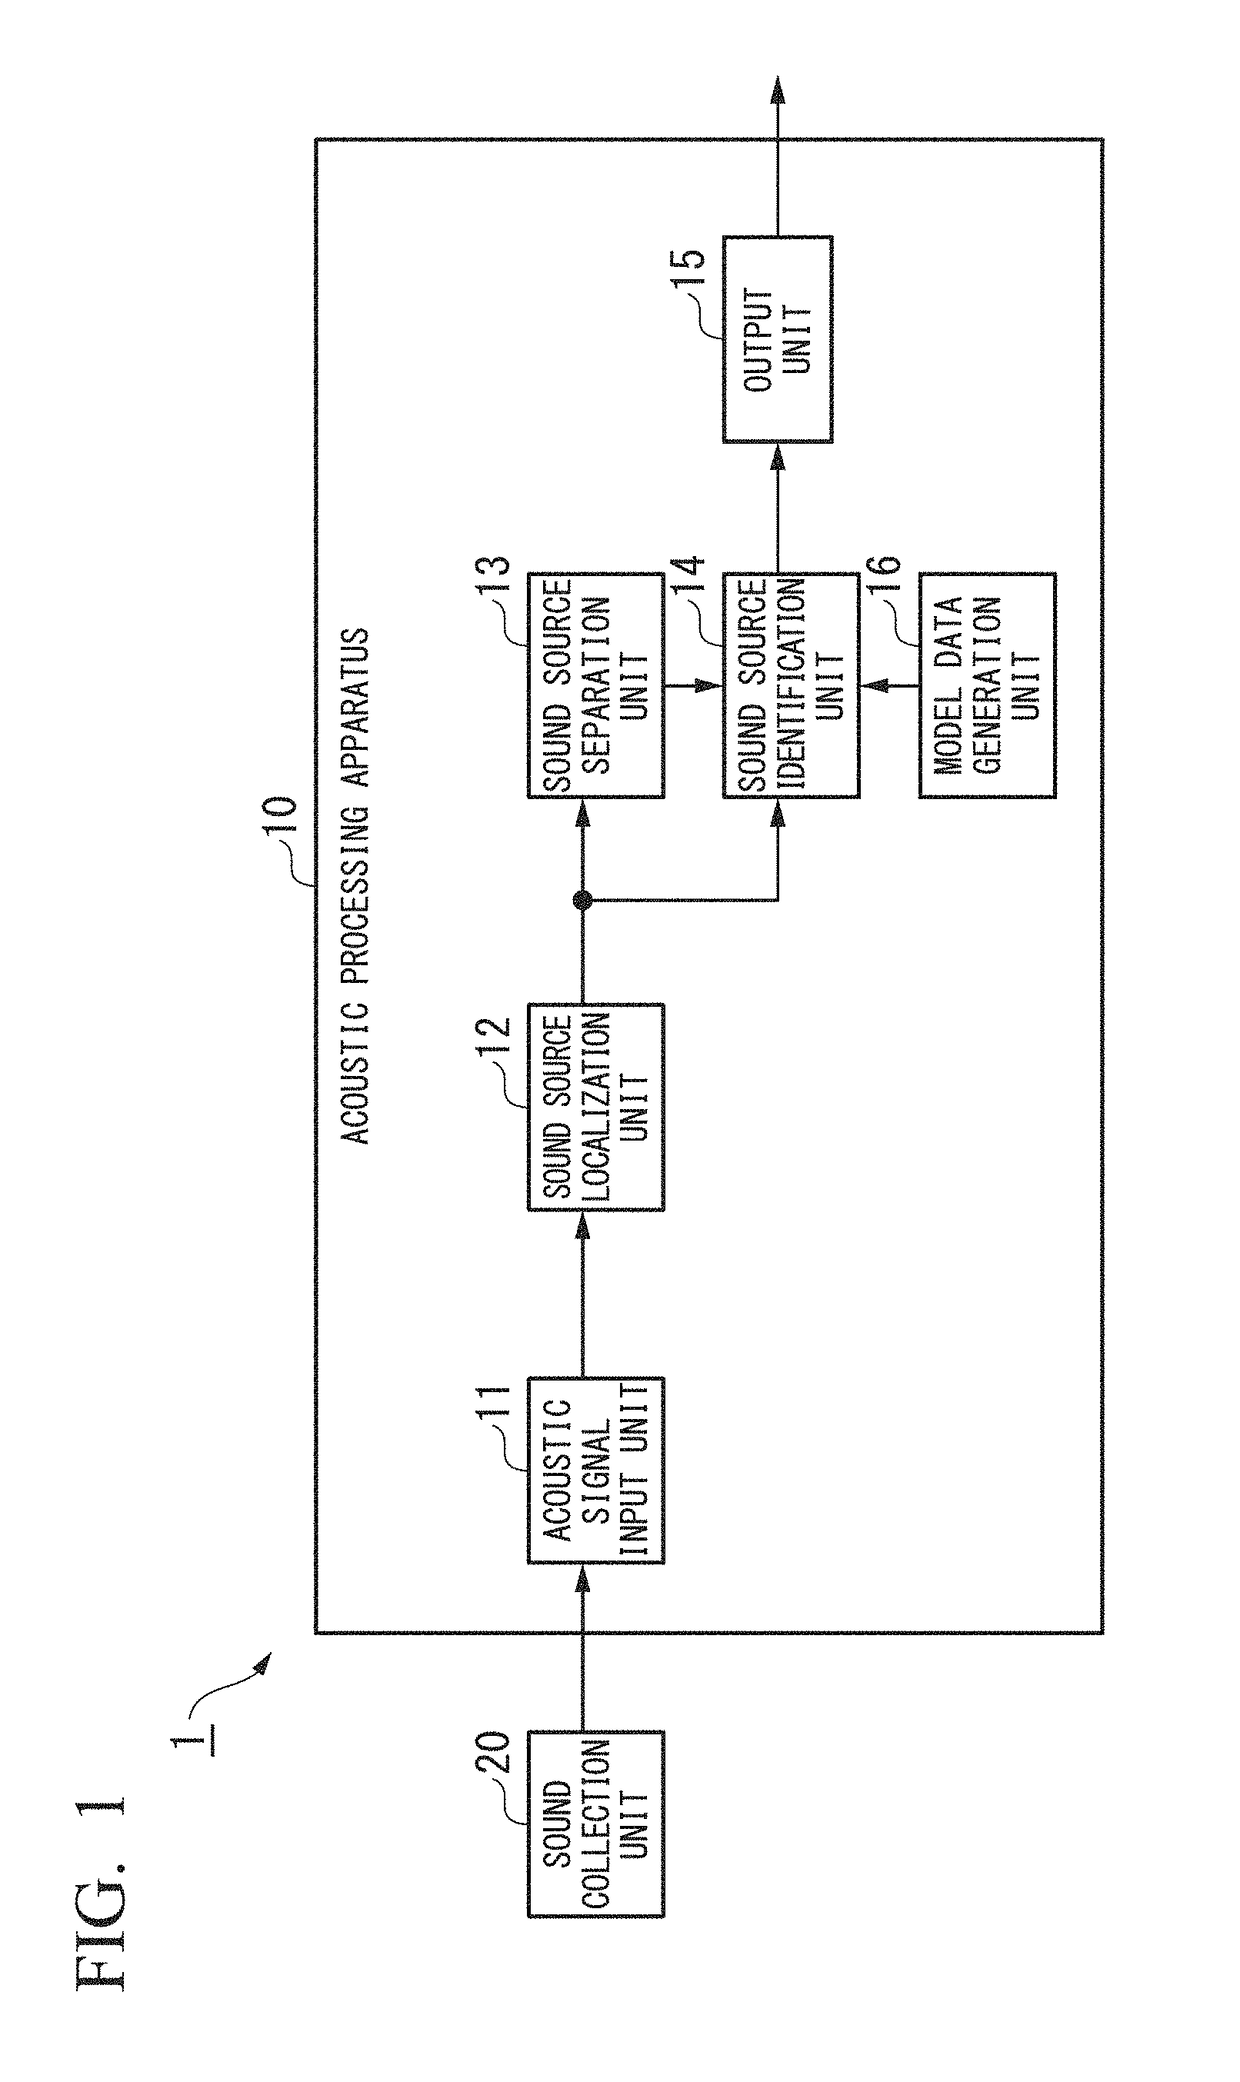 Acoustic processing apparatus and acoustic processing method